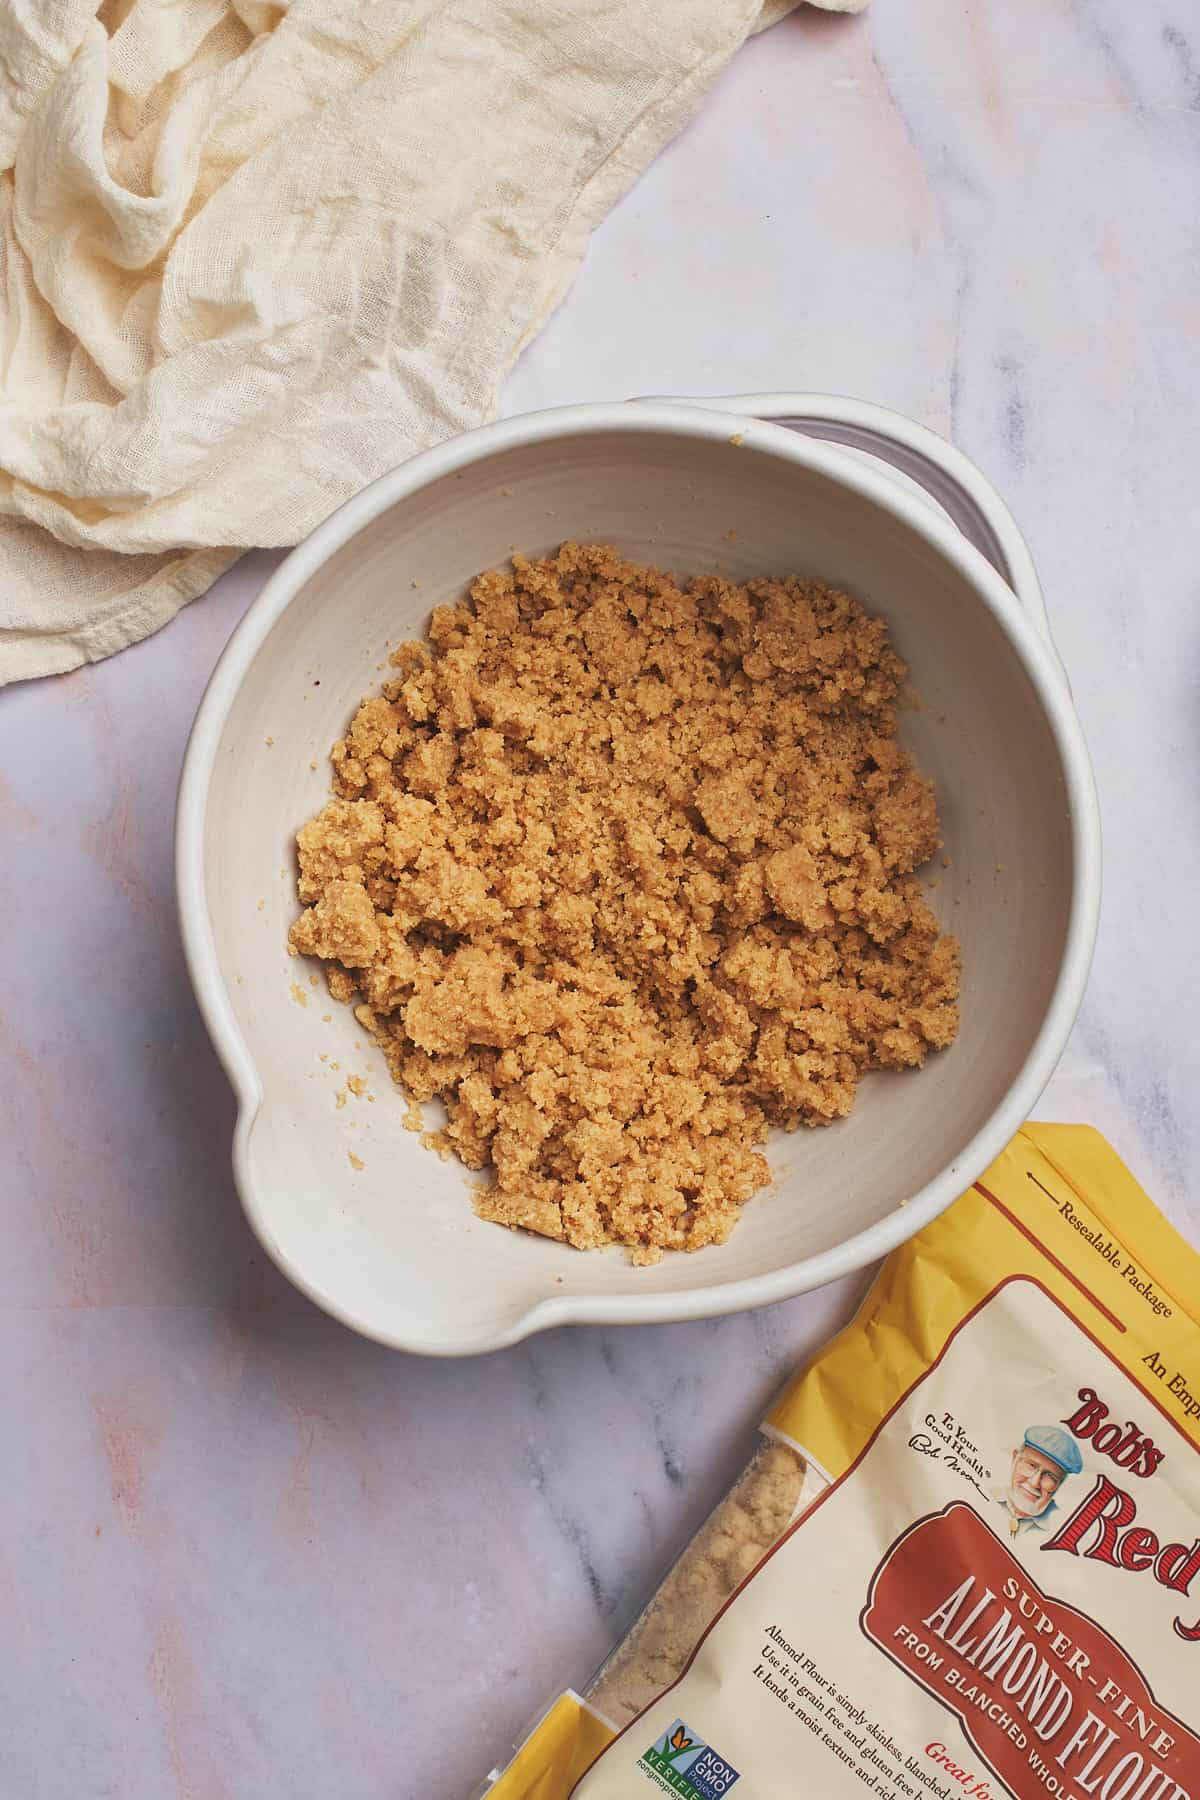 crumbled almond flour, sweetener, and butter mixture in a bowl with a bag of bob's red mill almond flour nearby. 